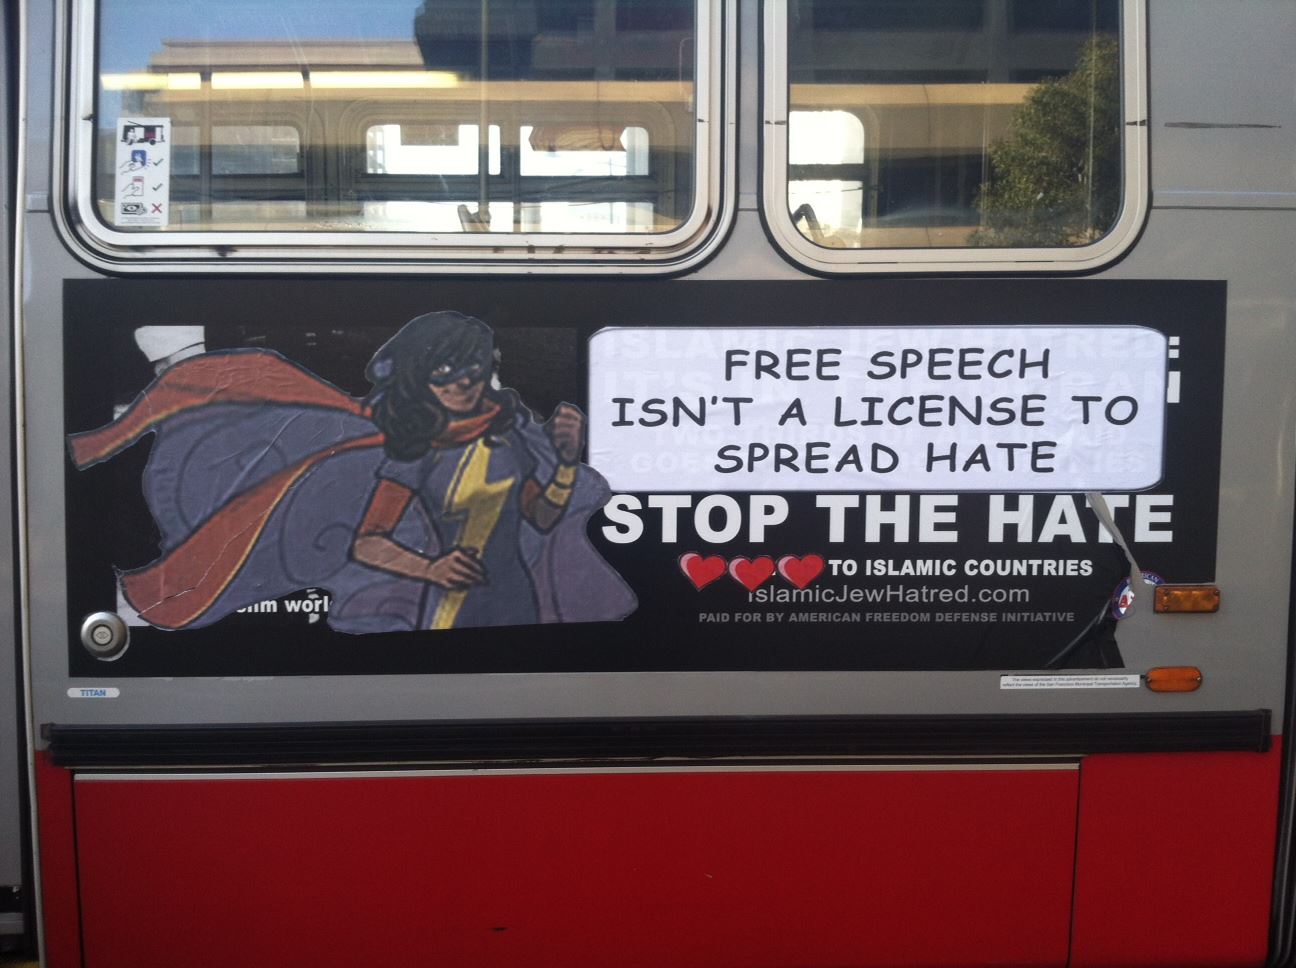 "free speech isn't a license to spread hate"